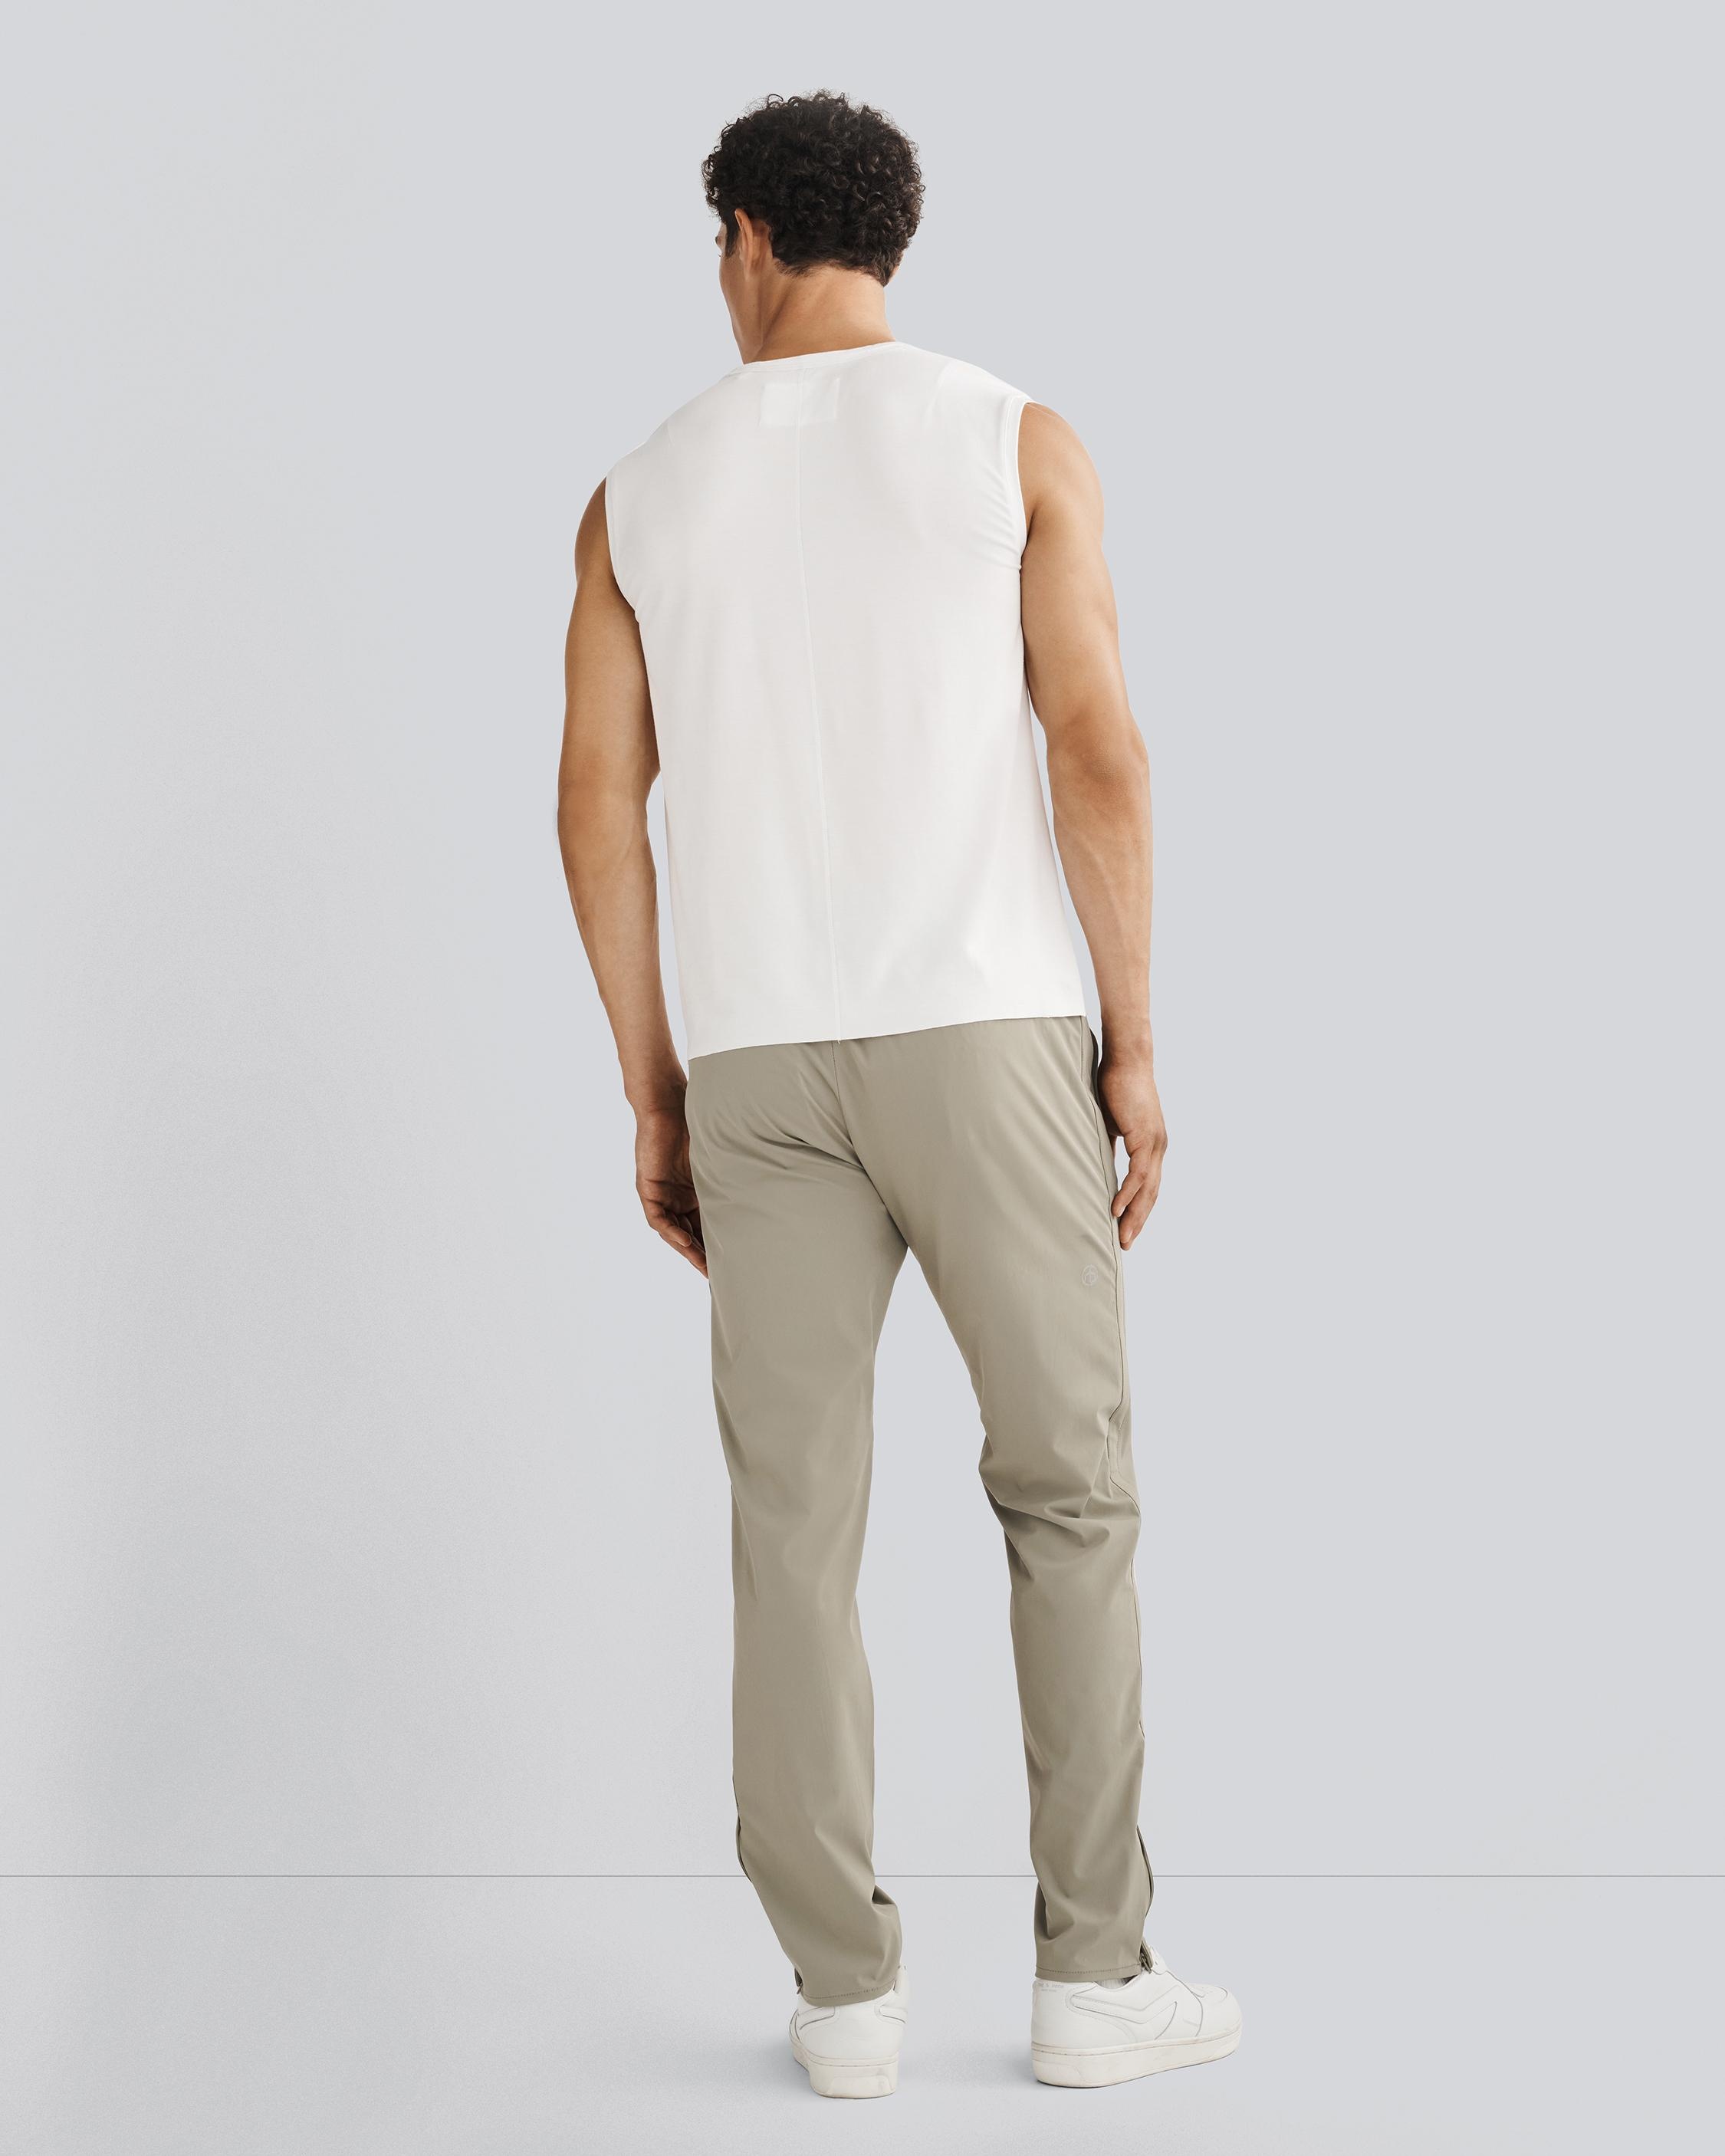 Pursuit Zander Technical Track Pant
Relaxed Fit - 5